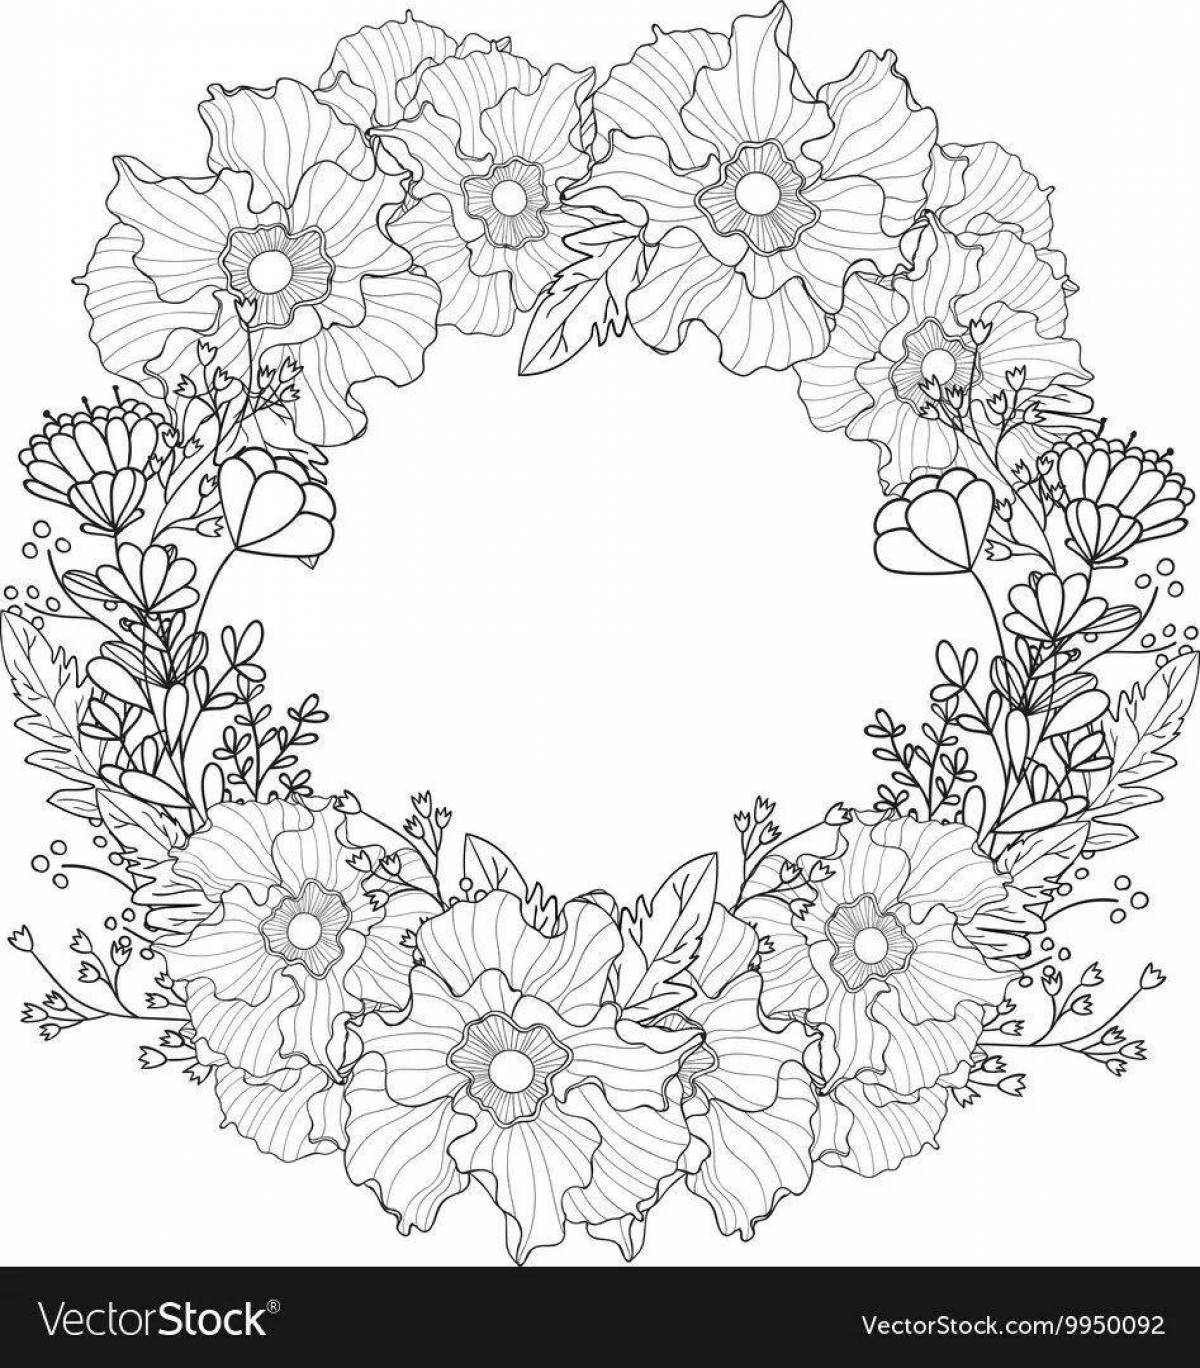 Coloring book bright wreath of flowers